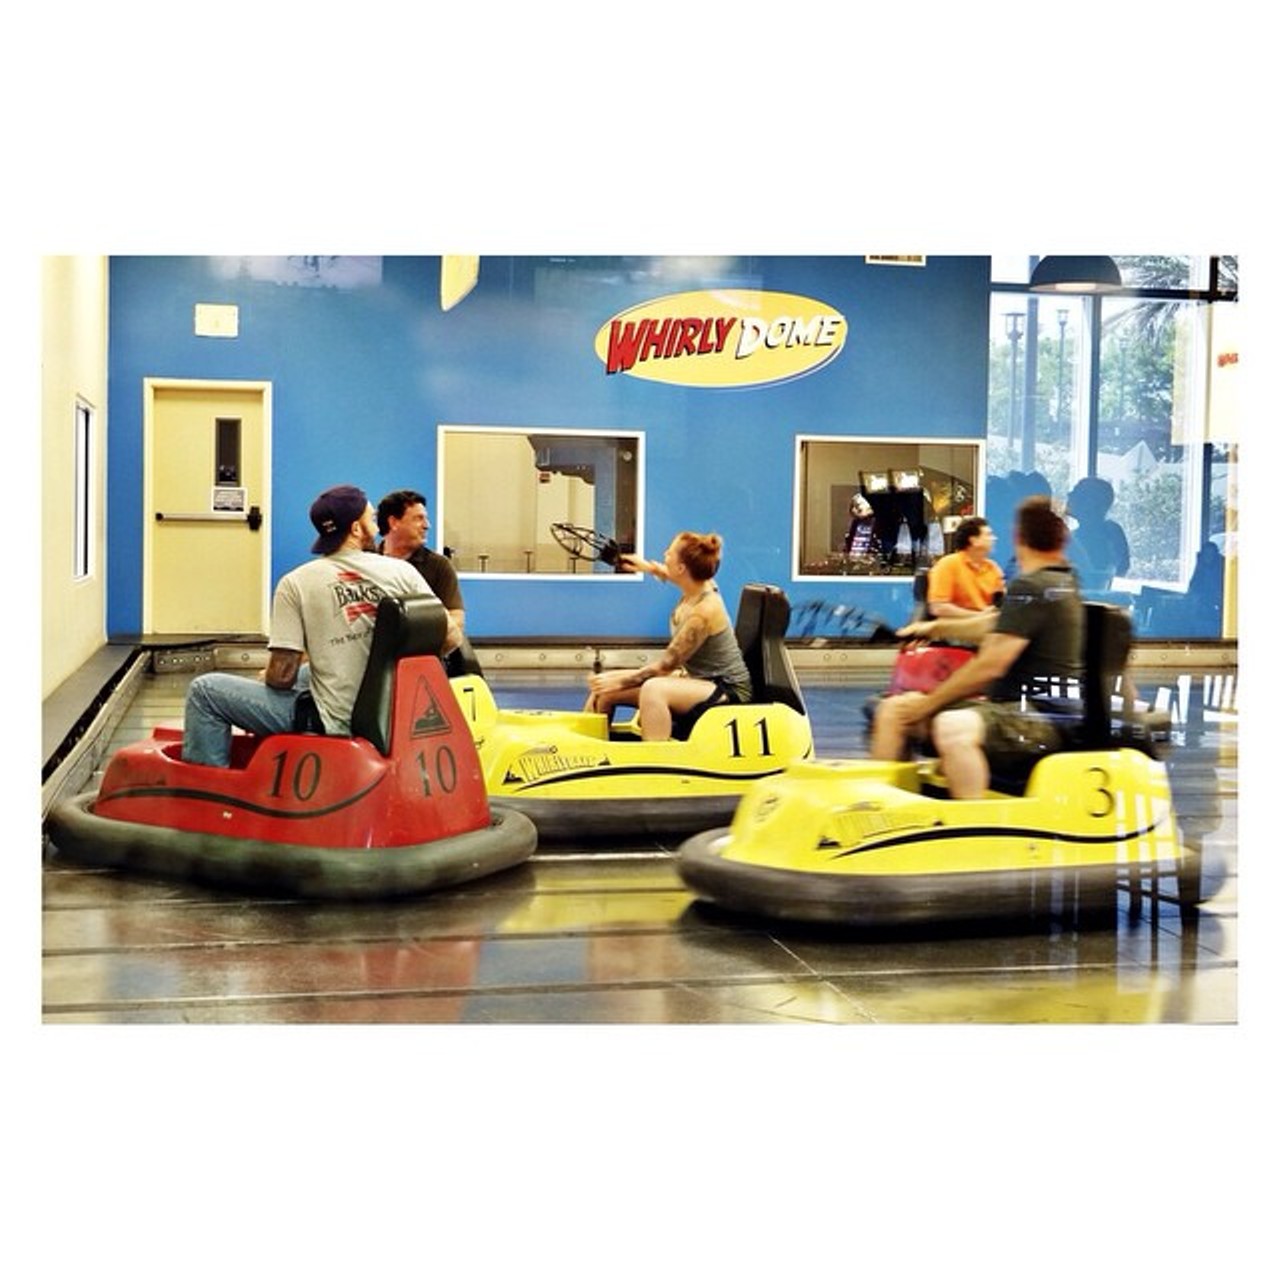 WhirlyDome
6464 International Drive | 407-212-3030
Enter the WhirlyDome and leave a champion &#145;cause let&#146;s be real, it&#146;s awesome to own your kids in games. Whirly Ball is a combination of bumper cars, basketball and jai alai, so your kids will probably have no clue what&#146;s going on, but they&#146;ll definitely have fun. The restaurant here stocks a surprisingly crafty beer selection with hometown favorites like Cigar City and Lagunitas.
Photo via kimchatkah/Instagram